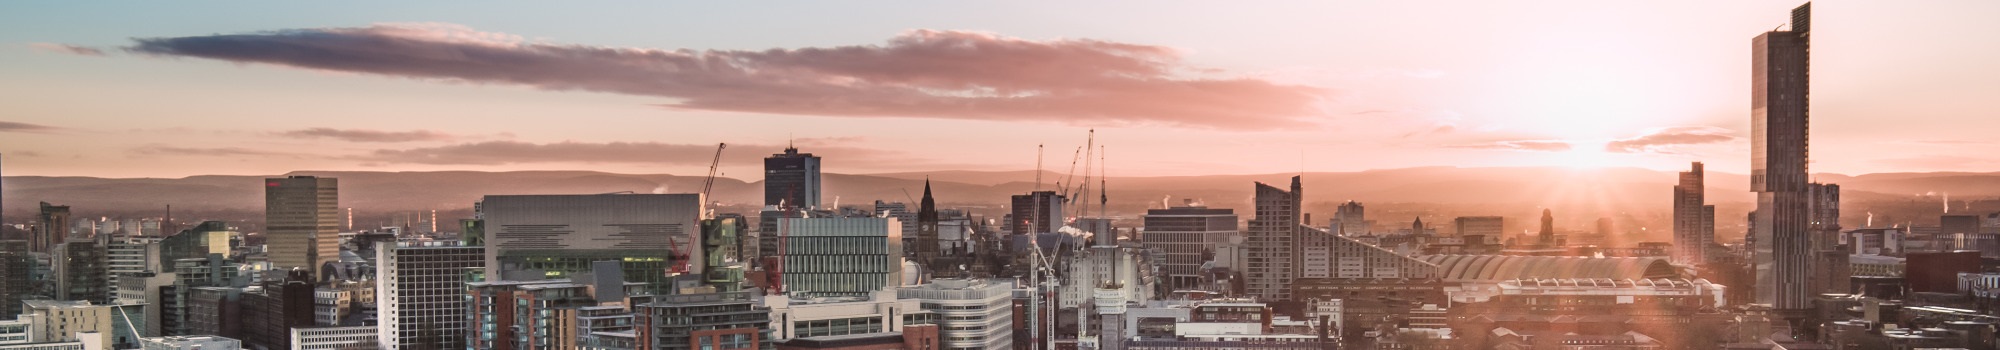 manchester-skyline-picture-id1067367850